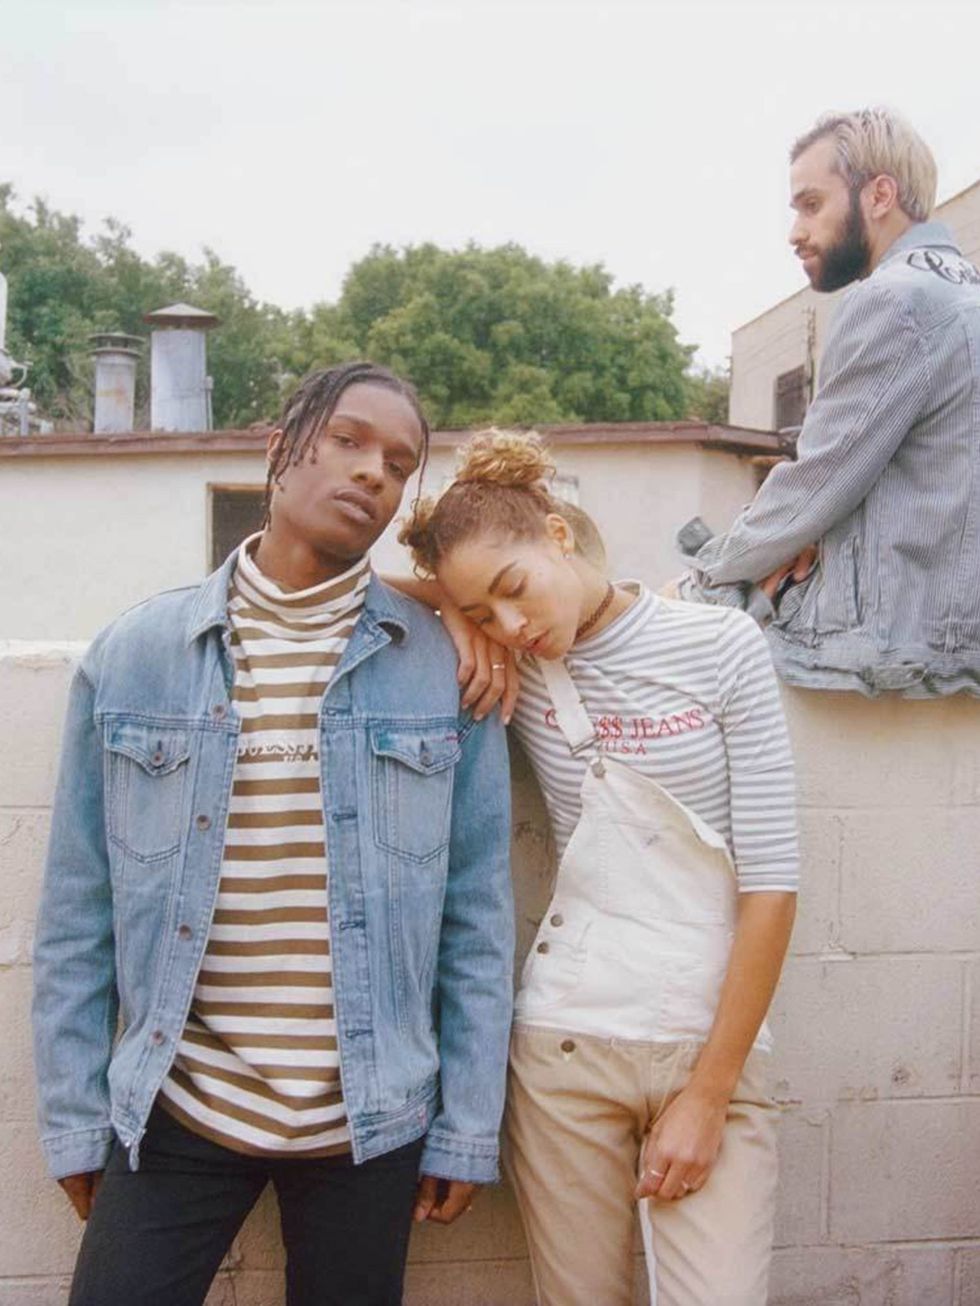 <p>Guess Original x A$AP Rocky </p>

<p>GUESS has launched it's new line Guess Originals in collaboration with fashion man of the moment A$AP Rocky. A collection of acid washes, 90s logo tees, bomber jackets and overalls the collection is a real 90s celeb